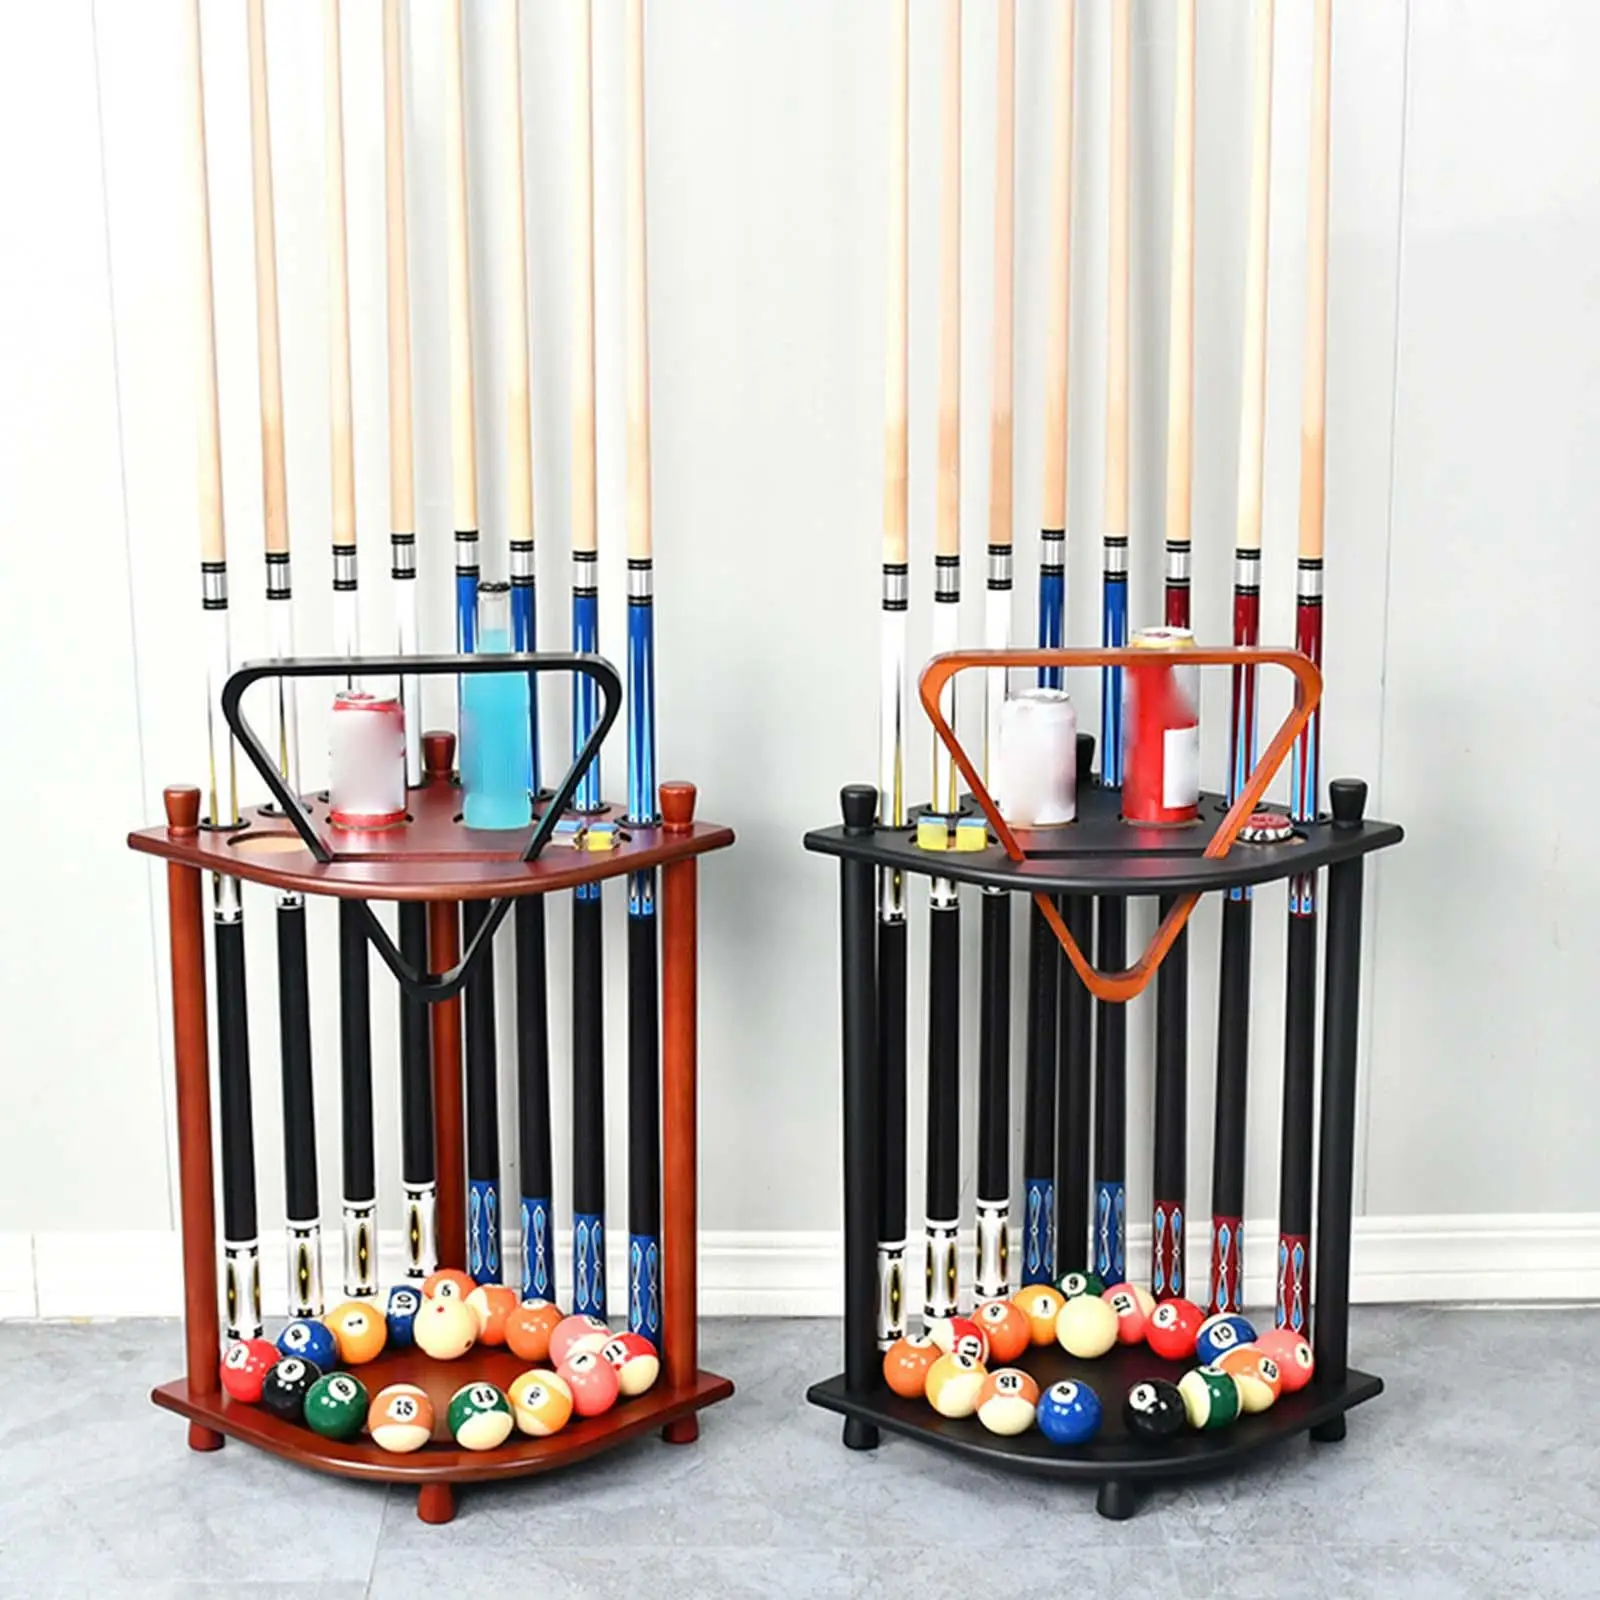 Billiards Pool  Rack for s and Balls Holds 8  Sticks Solid Wood Free Standing Pool Rod Holder W/ Drink Holder